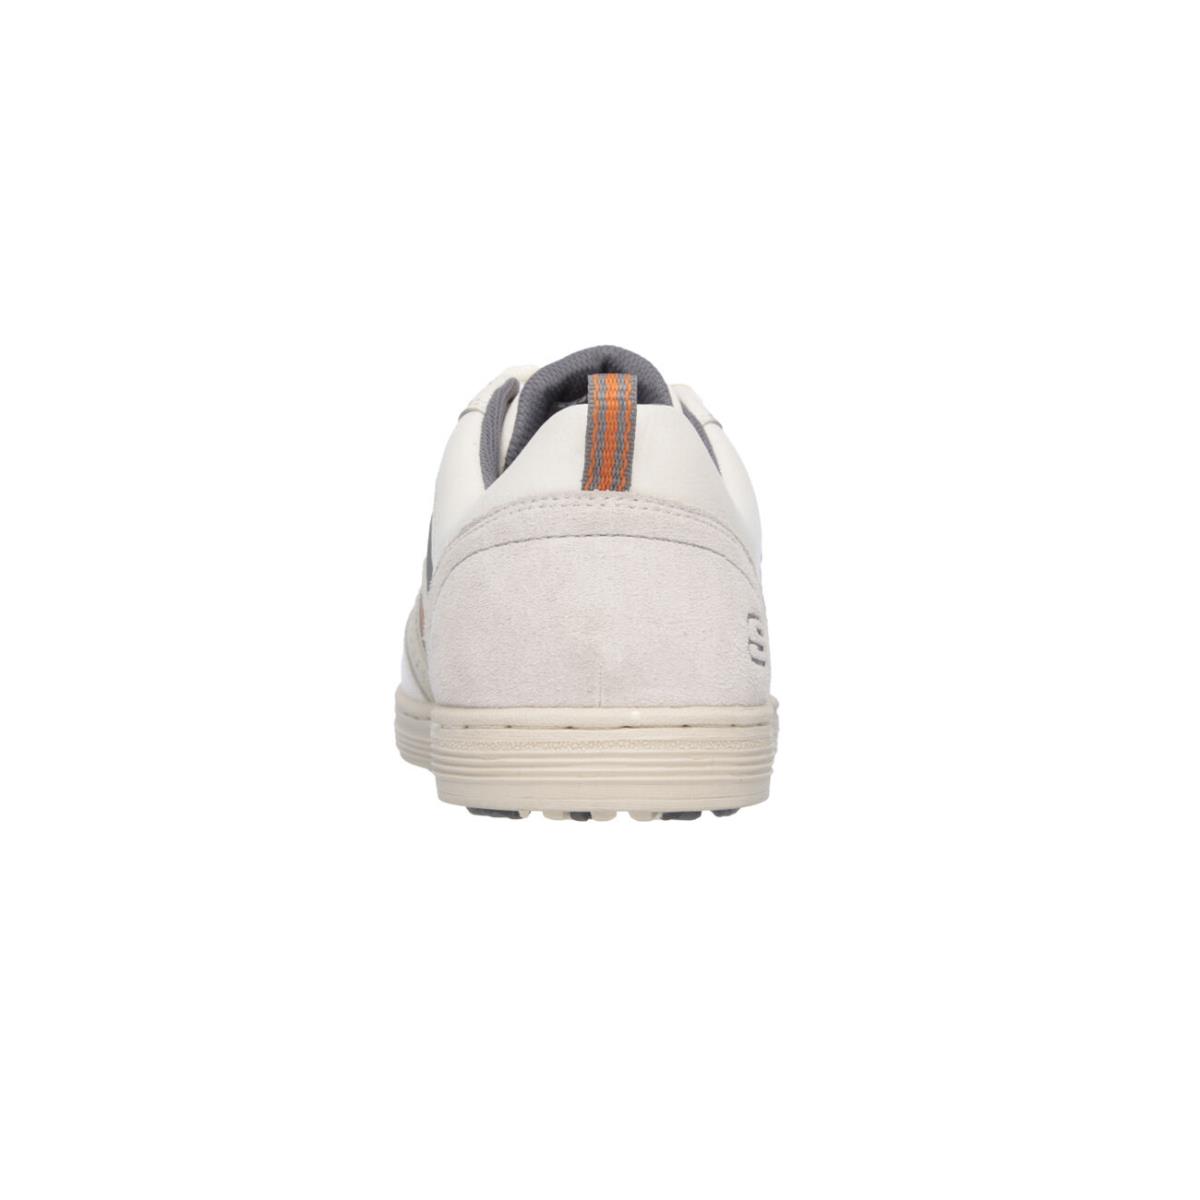 Skechers shoes  - Off White 0